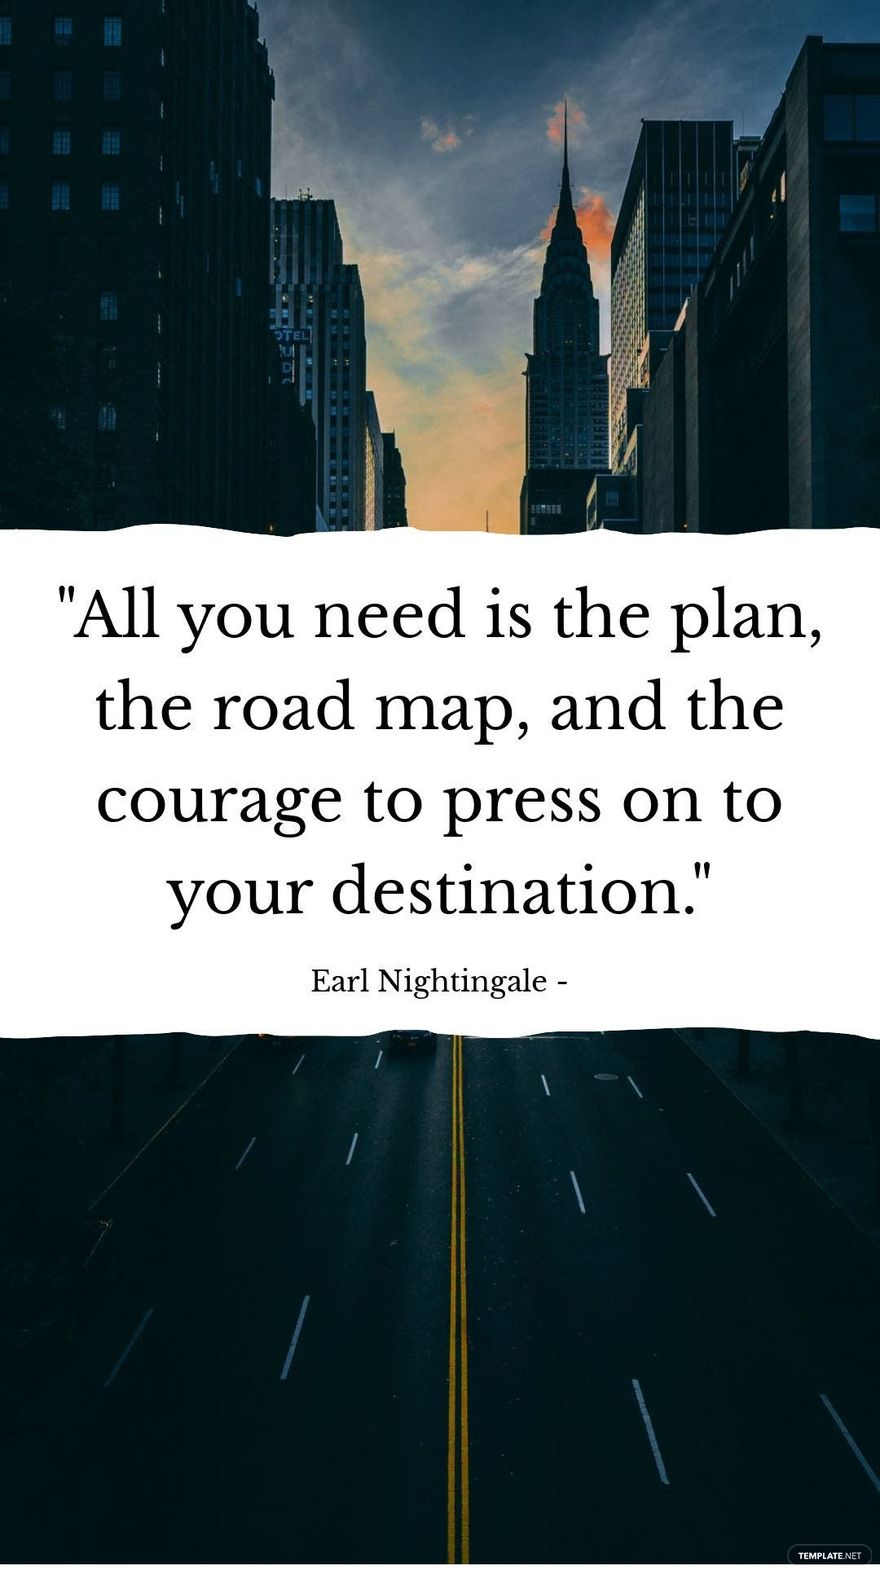 Earl Nightingale - All you need is the plan, the road map, and the courage to press on to your destination.